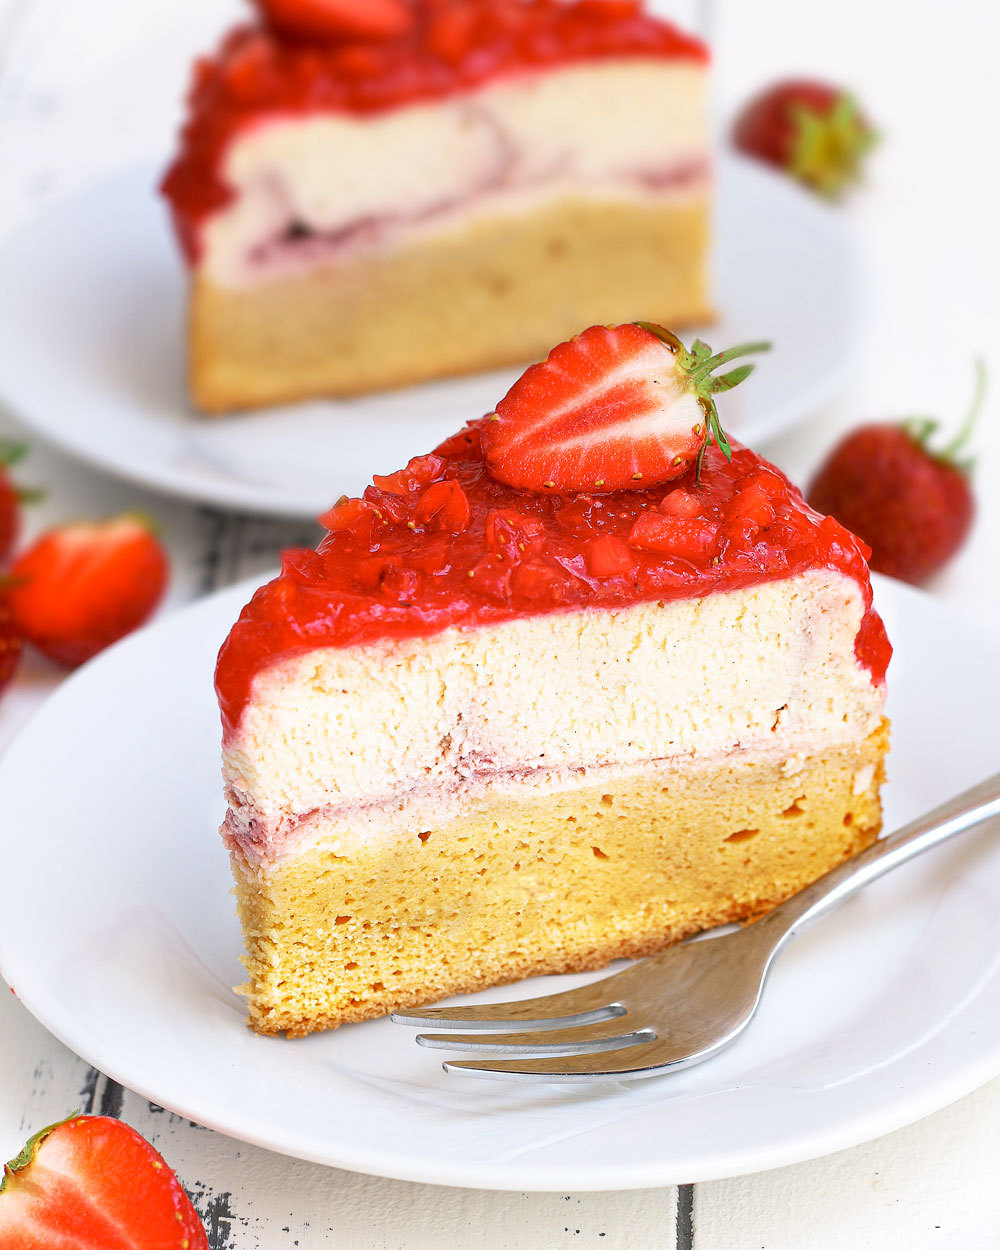 Low Carb Strawberry Cheesecake